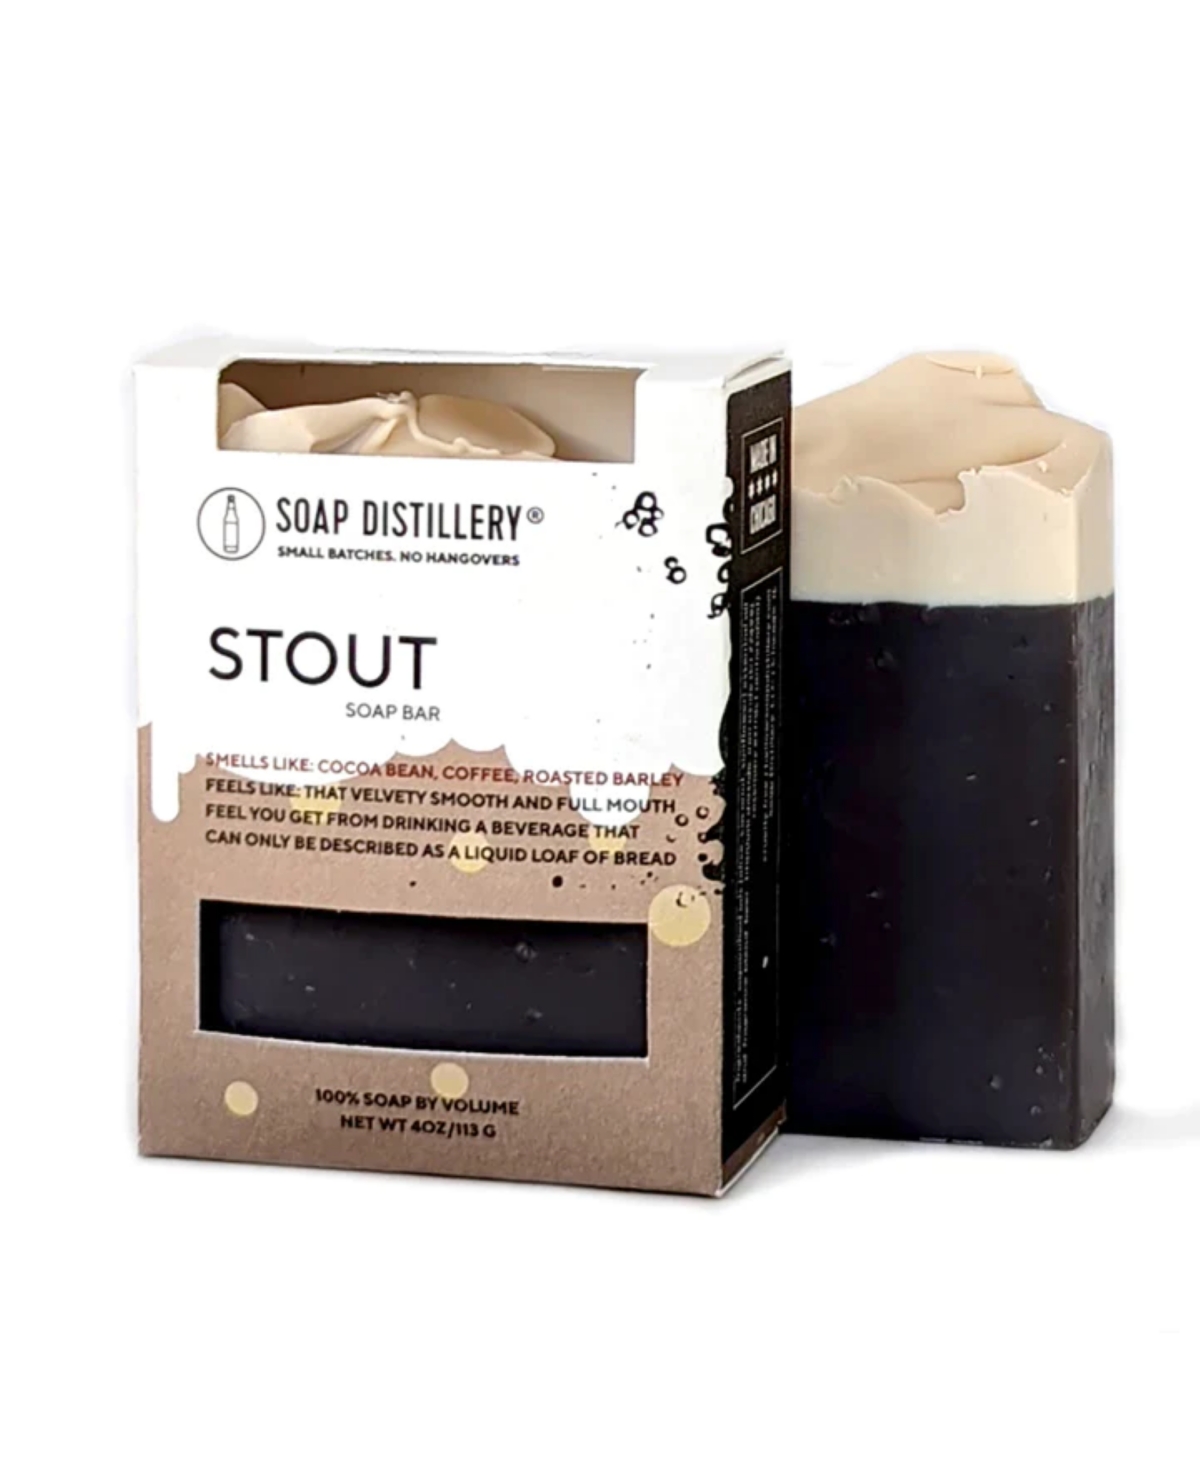 Soap Distillery Stout Soap Bar In Brown